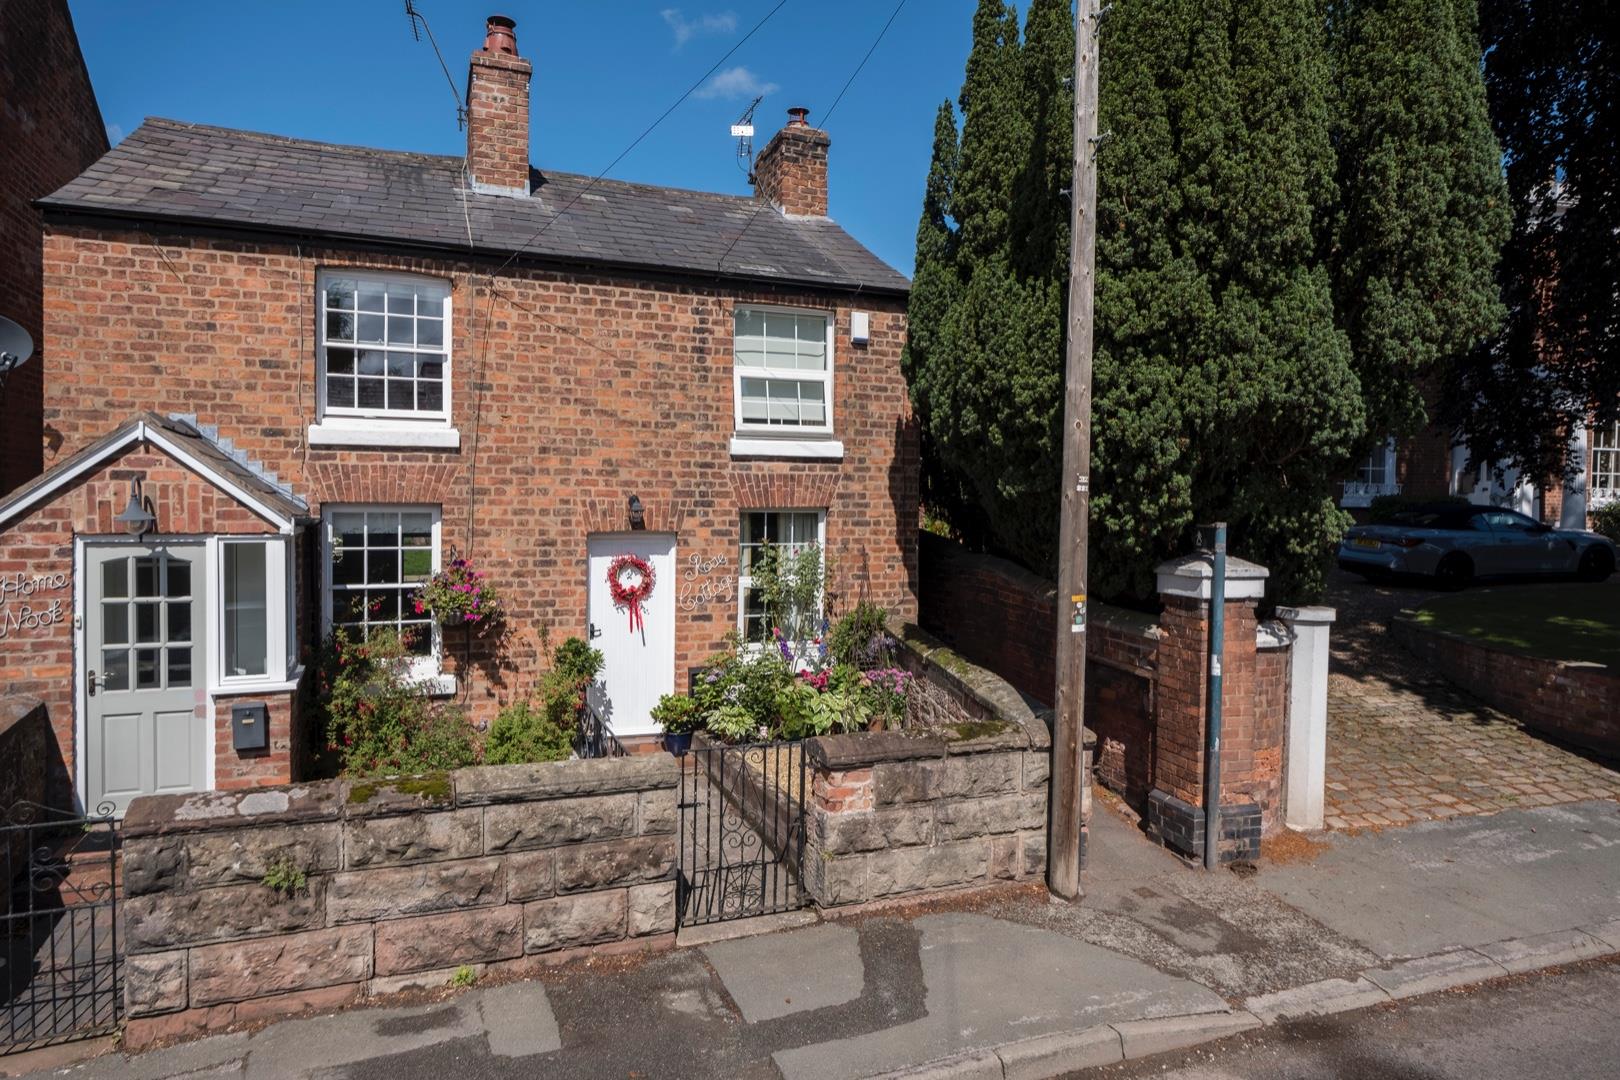 2 bedroom  Semi Detached House for Sale in Tattenhall